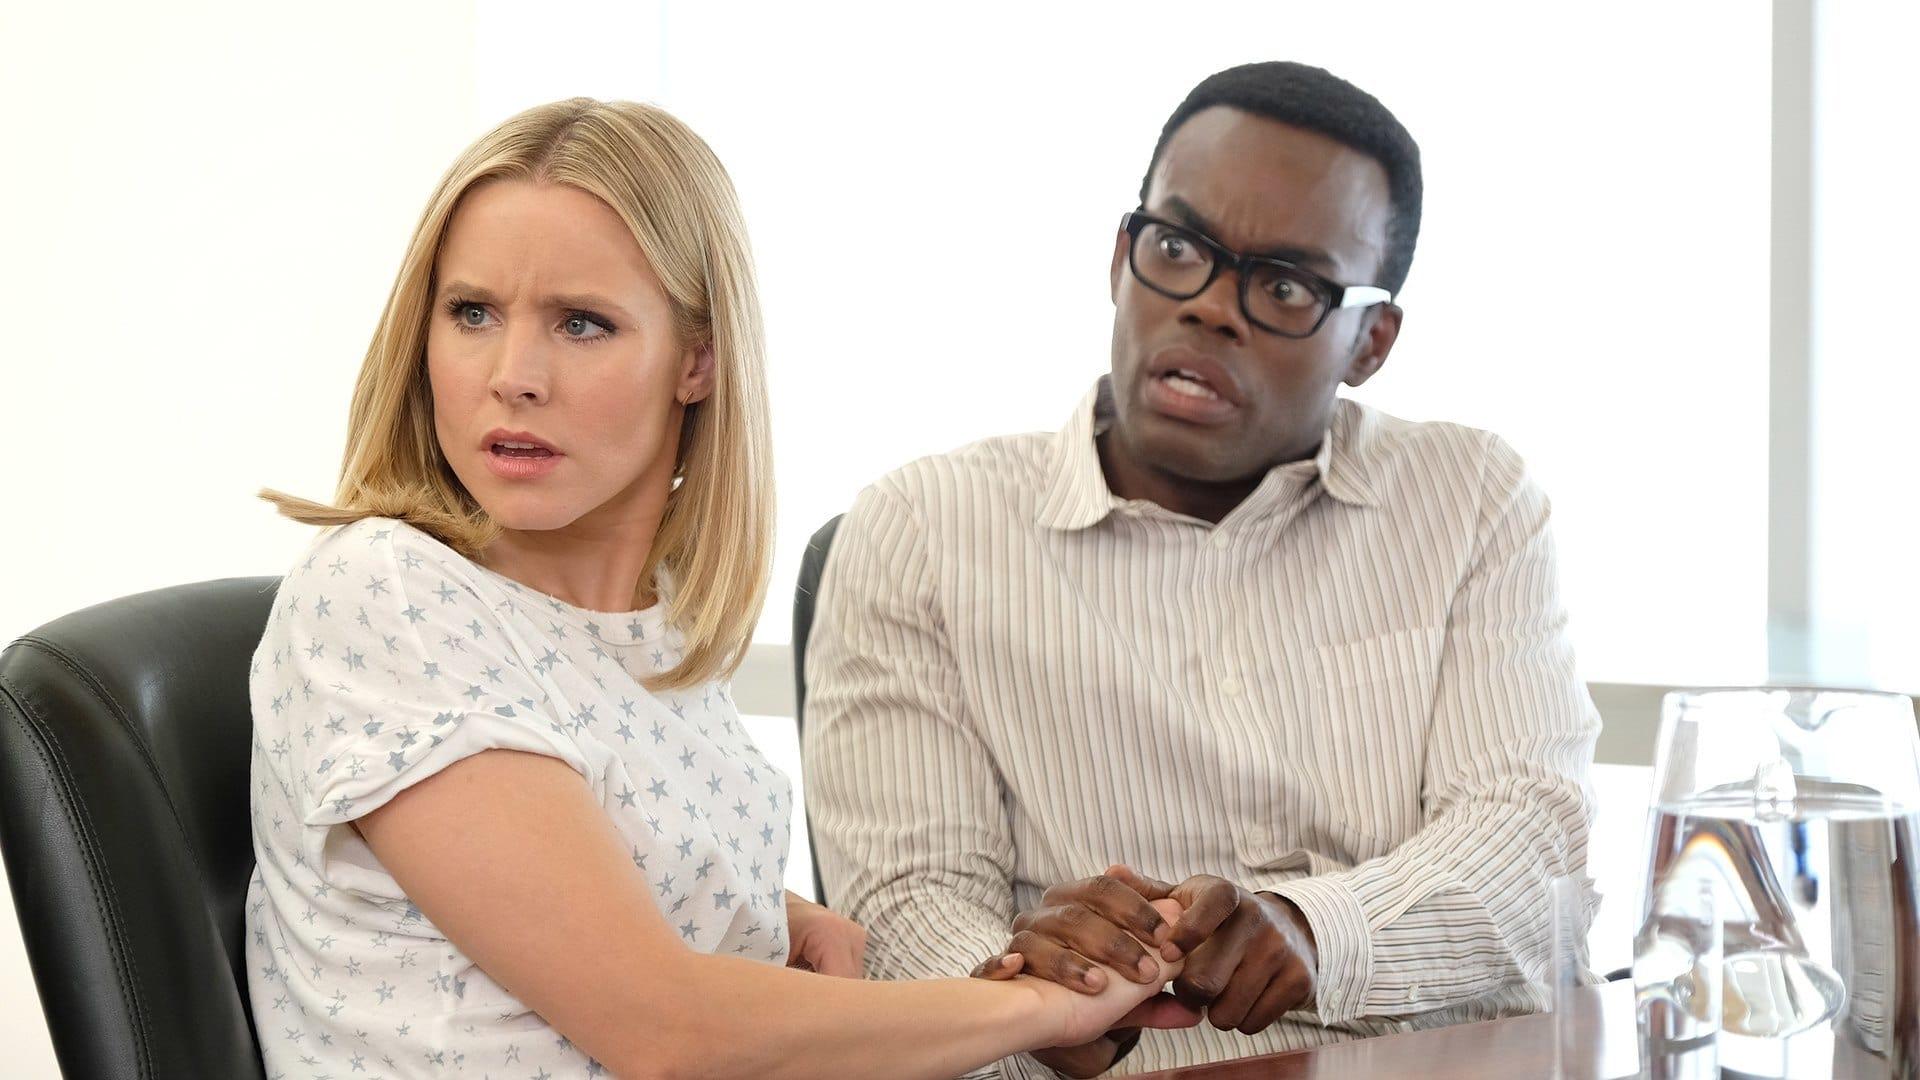 The Good Place (S03E11): Chidi Sees the Time-Knife Summary - Season 3 Episode 11 Guide1920 x 1080